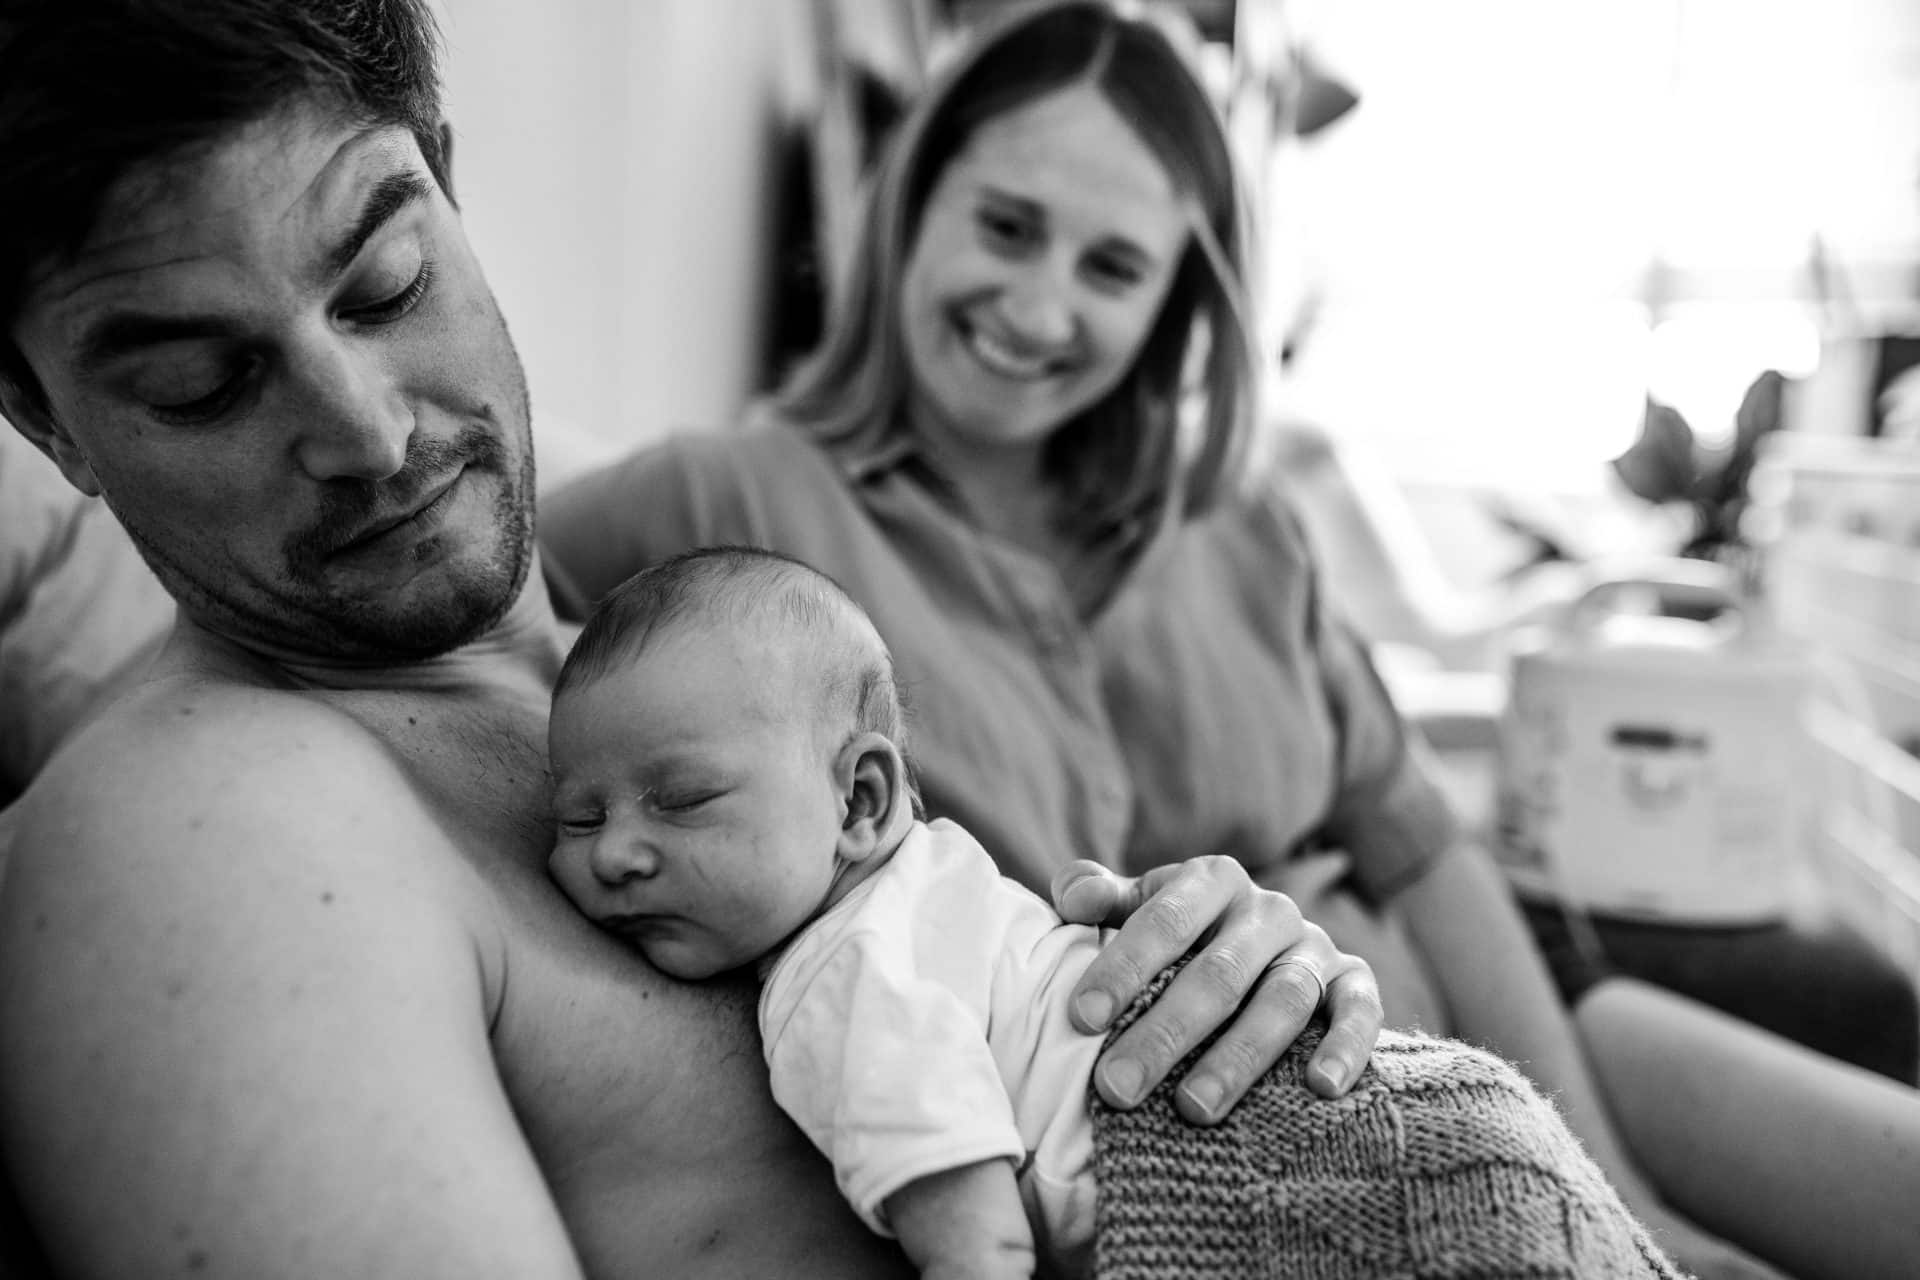 newborn sleeping on her father's chest, while he and her mom are contemplating at her